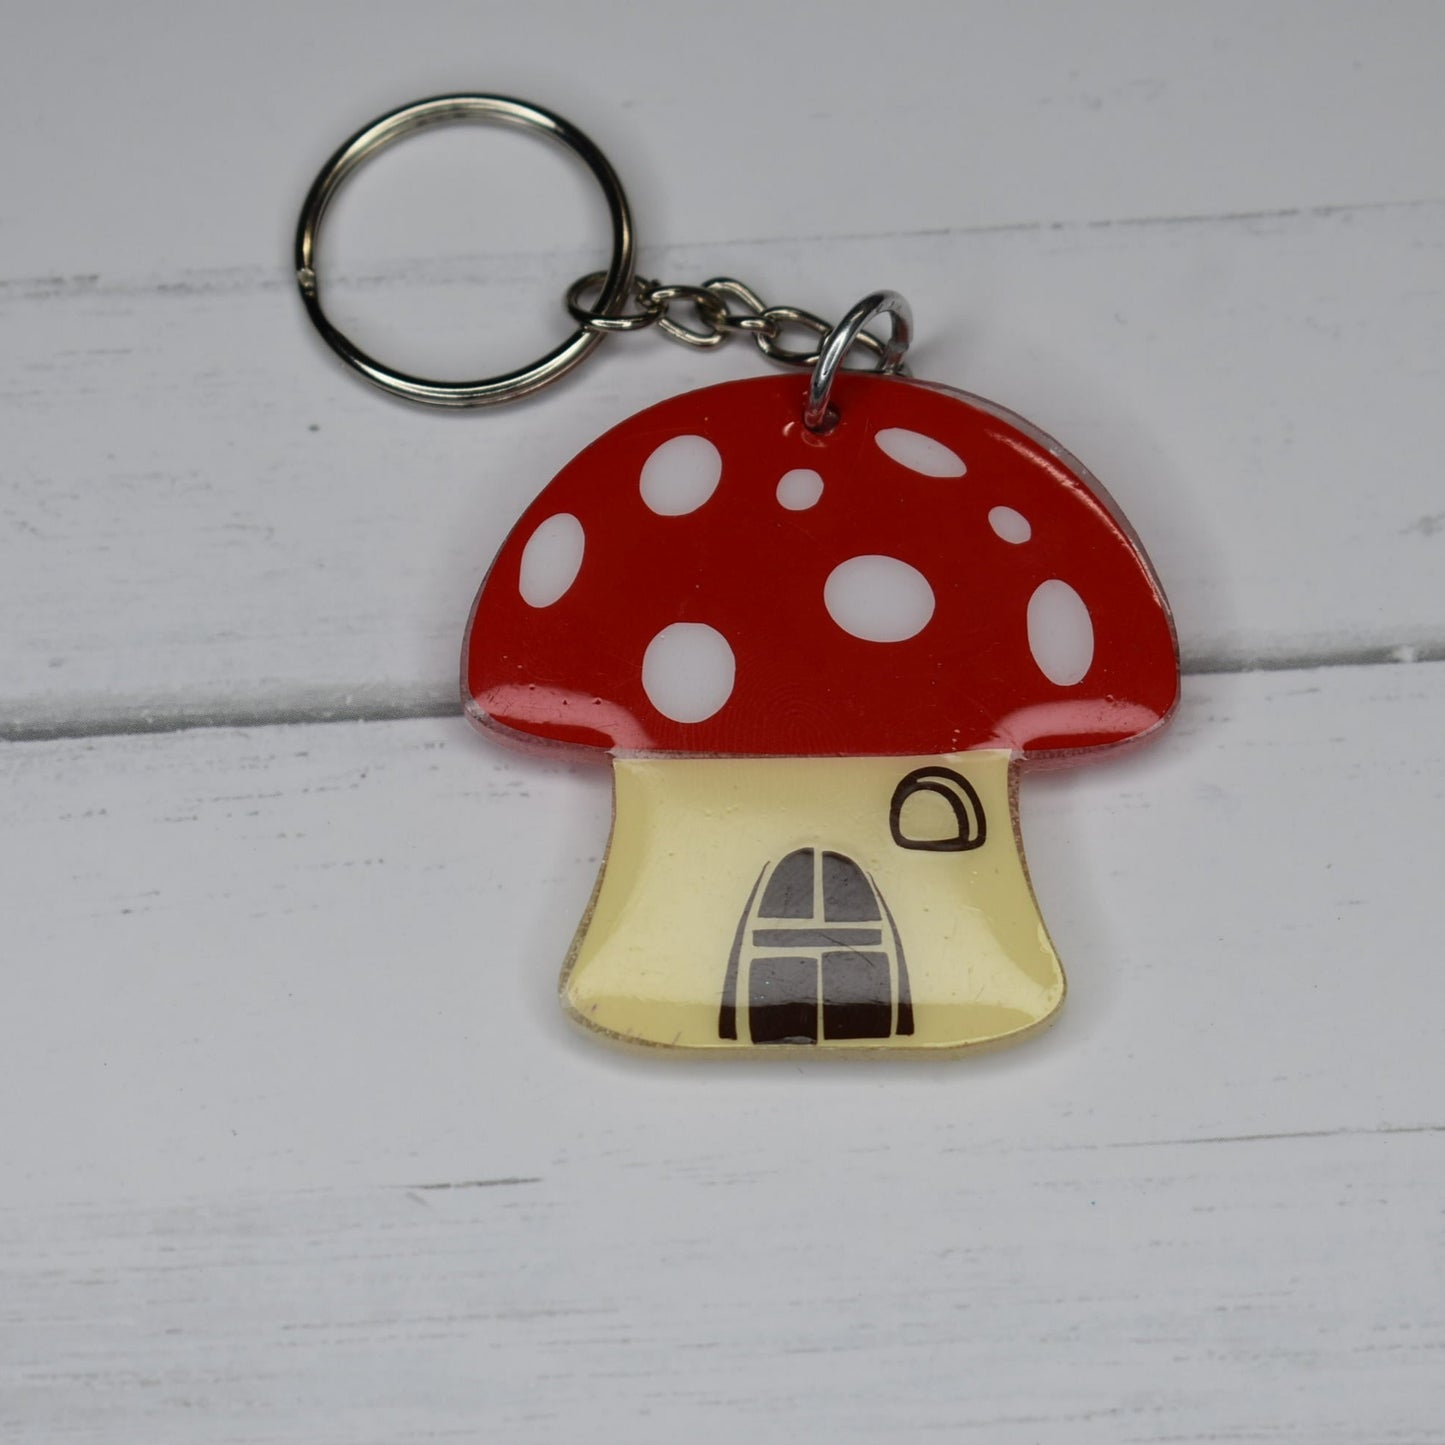 Made of durable acrylic, this creamy white base and iconic red-capped toadstool house will surely become a treasured possession for any gnome who calls it home.